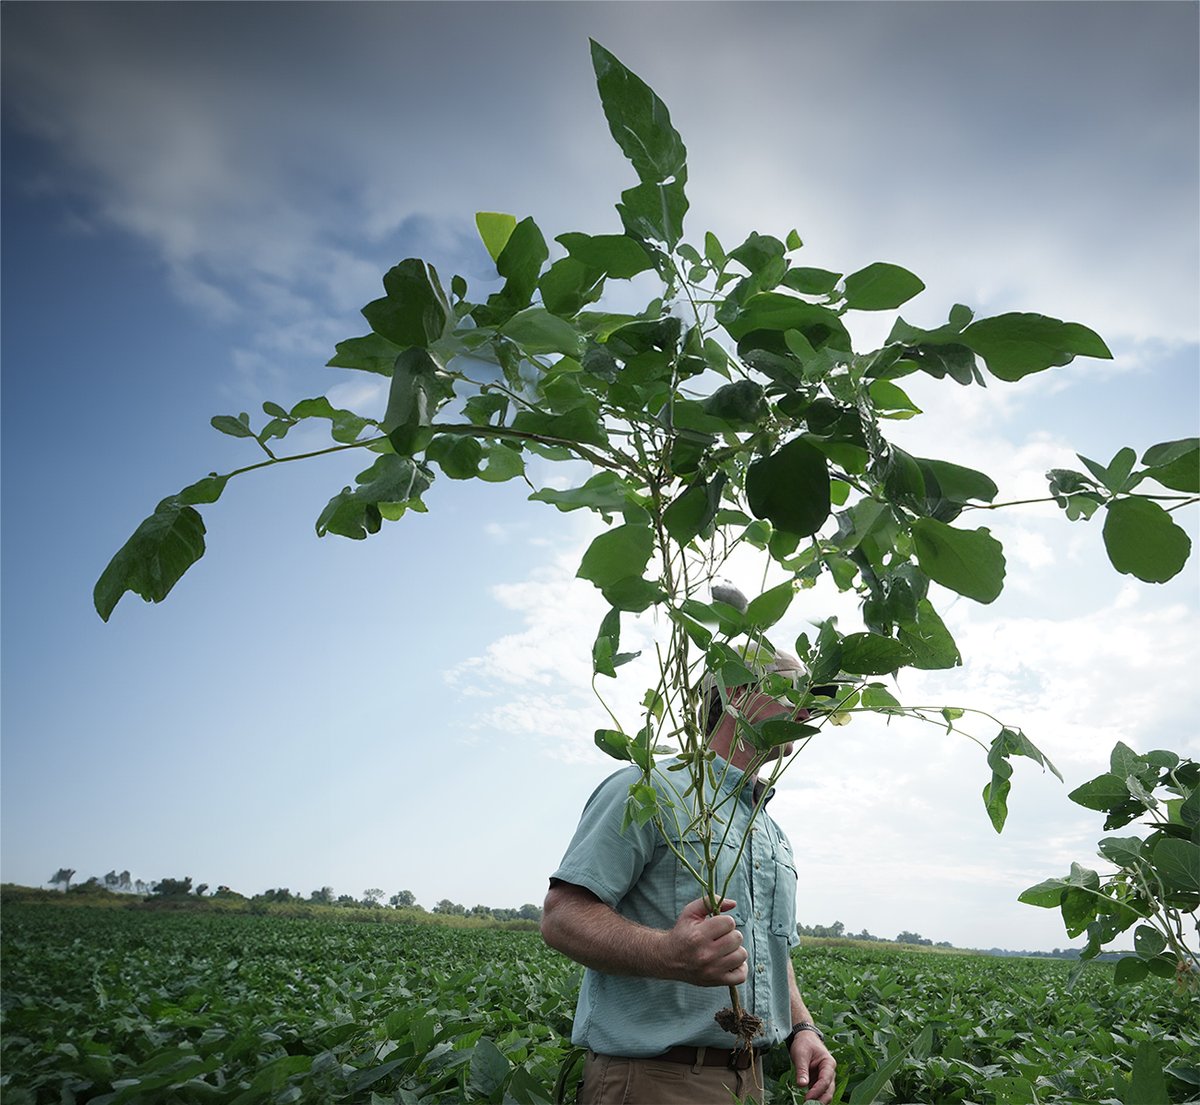 We're excited to introduce our new soybean variety, 'Jack and the beanstalk'! #aprilfools #farming #agriculture #ag #greenpointag #southernfarming